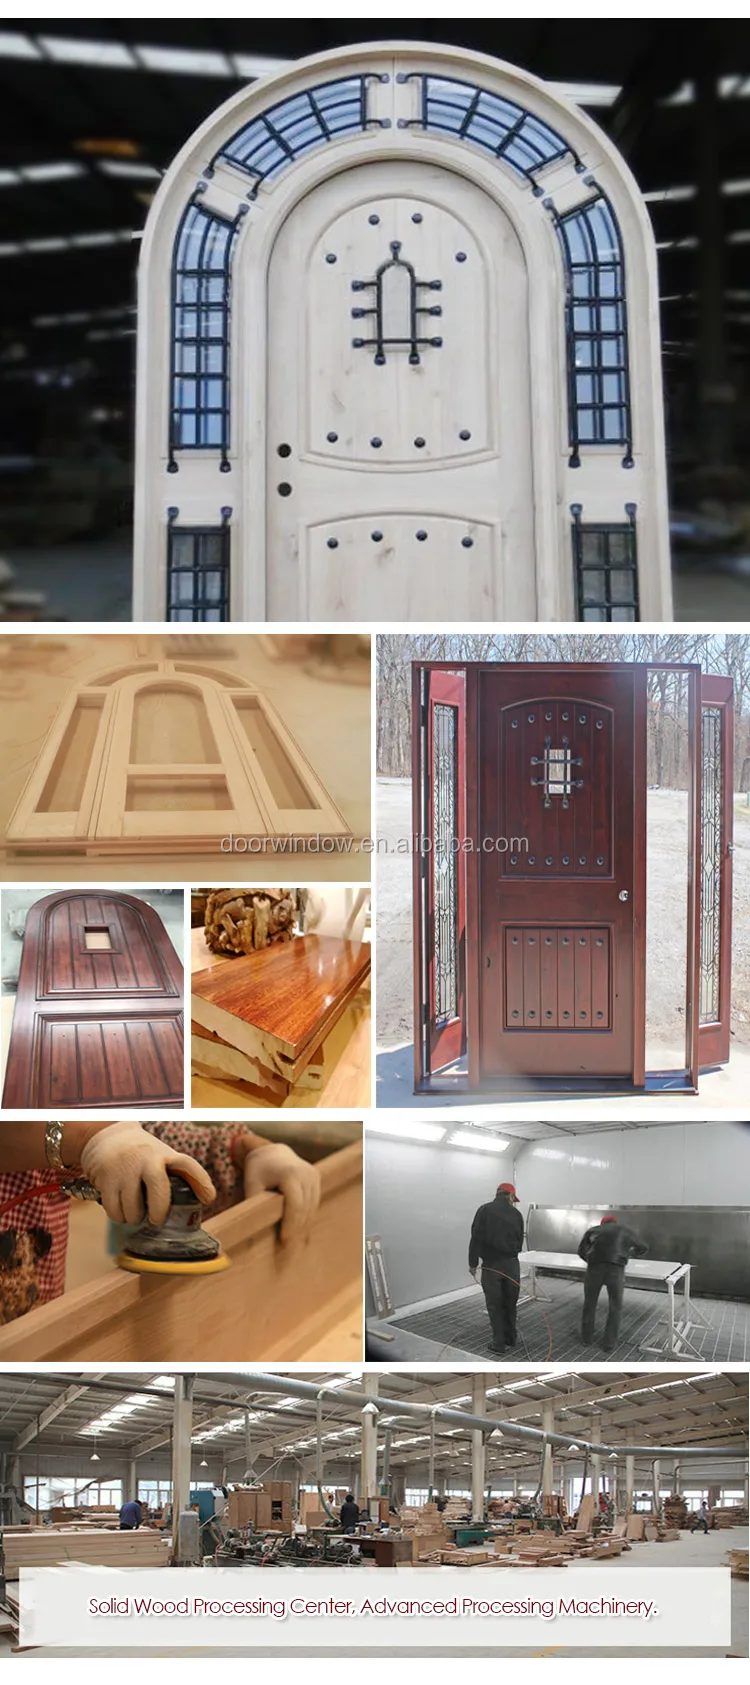 Front door styles pictures antique arched doors V-groove panels hotel entry doors to sale